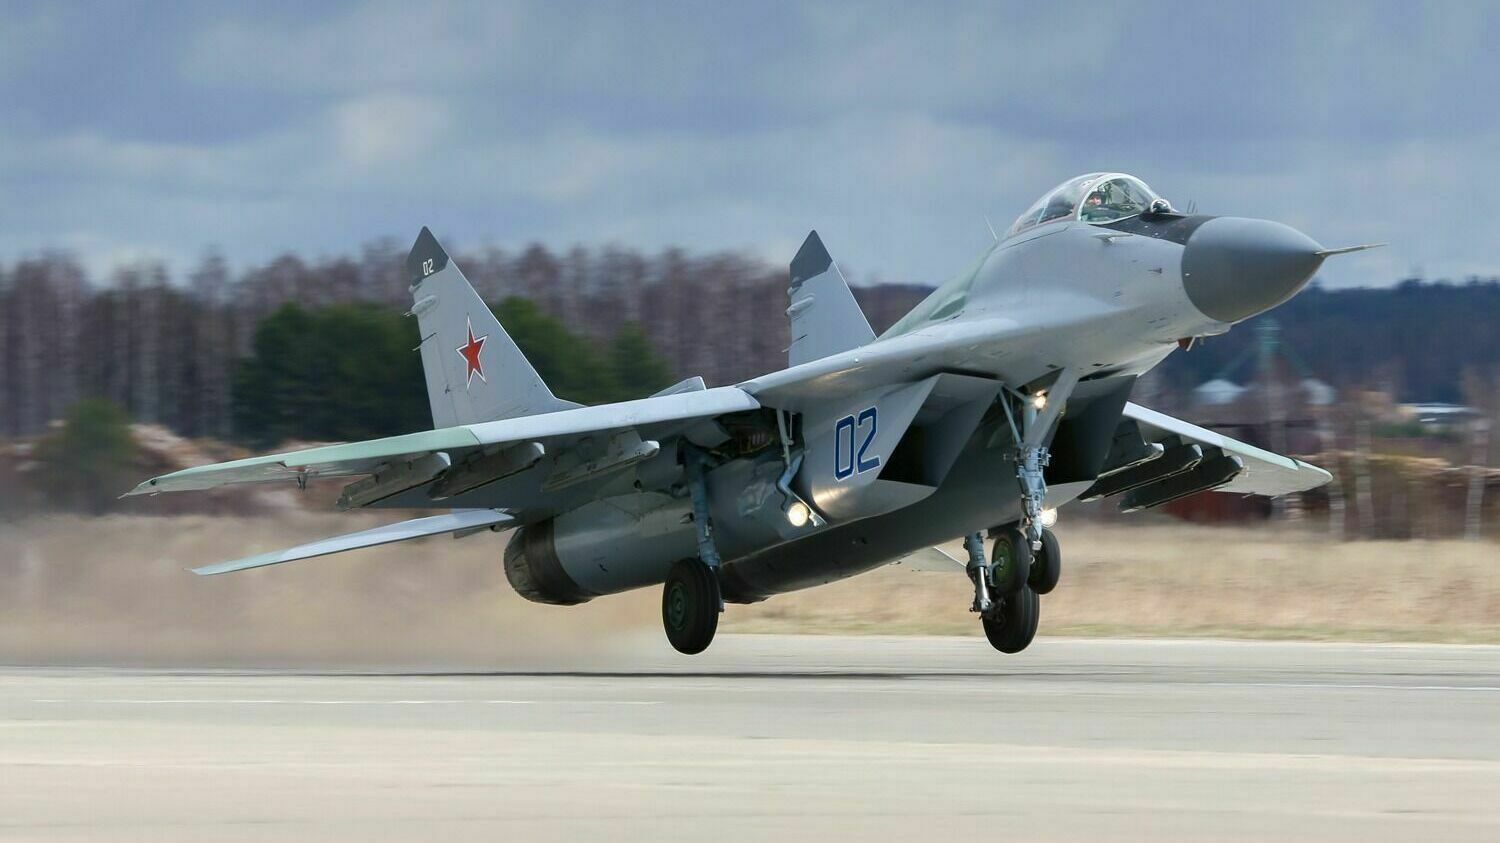 The transfer of Polish MiG-29 fighters to the Armed Forces of Ukraine is postponed indefinitely